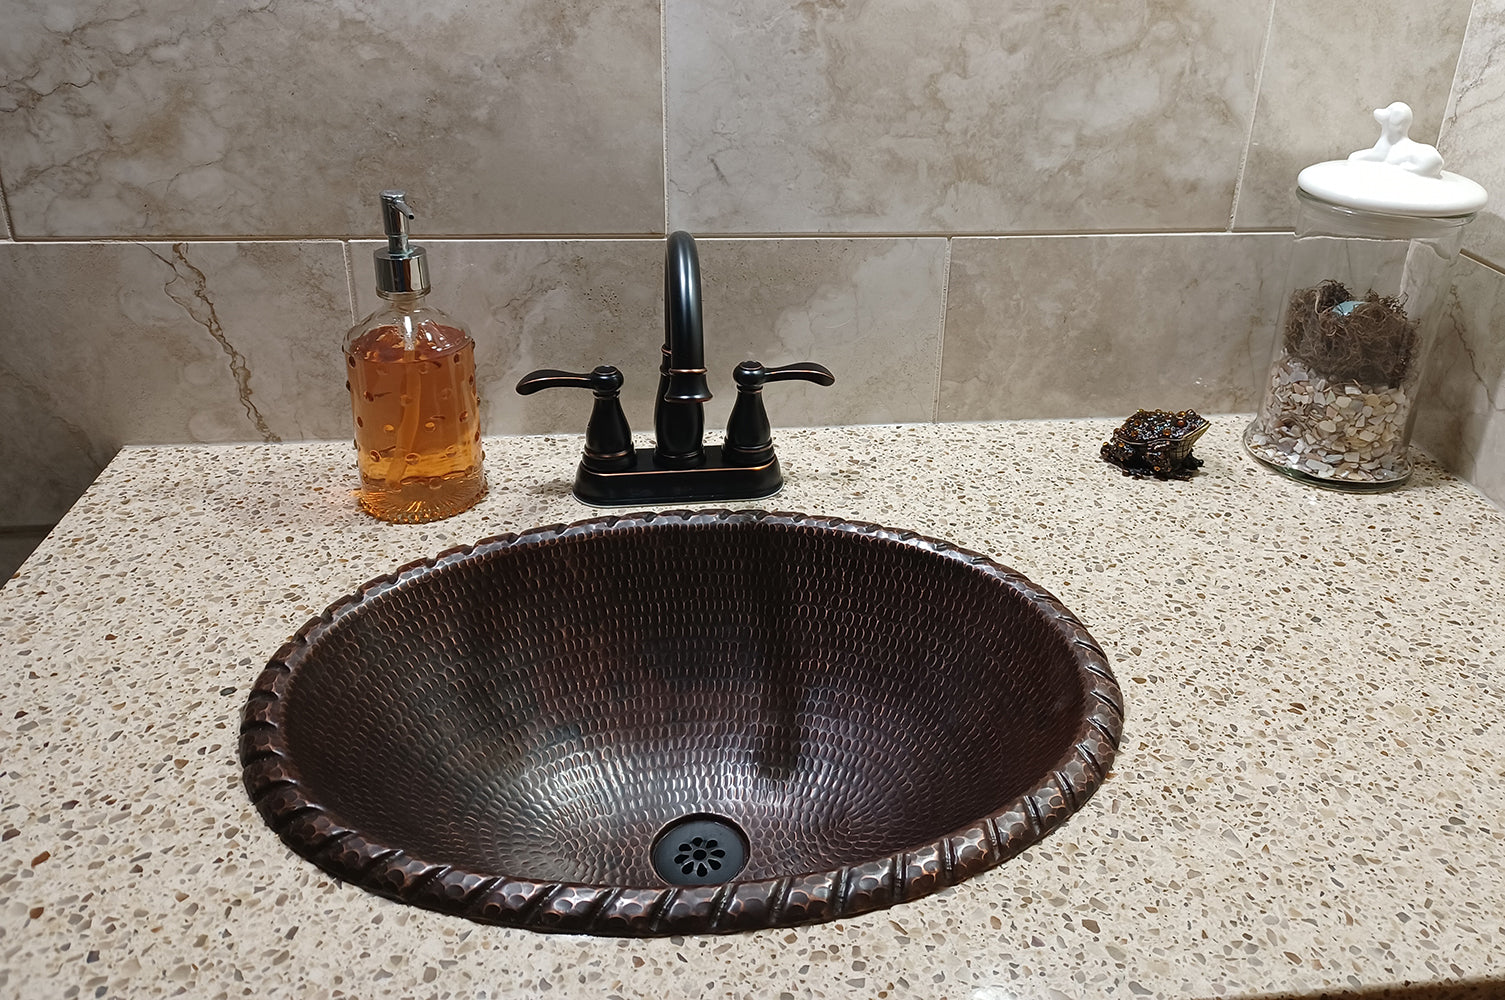 Premier Copper Products Oval Roped Rim Self Rimming Hammered Copper Sink